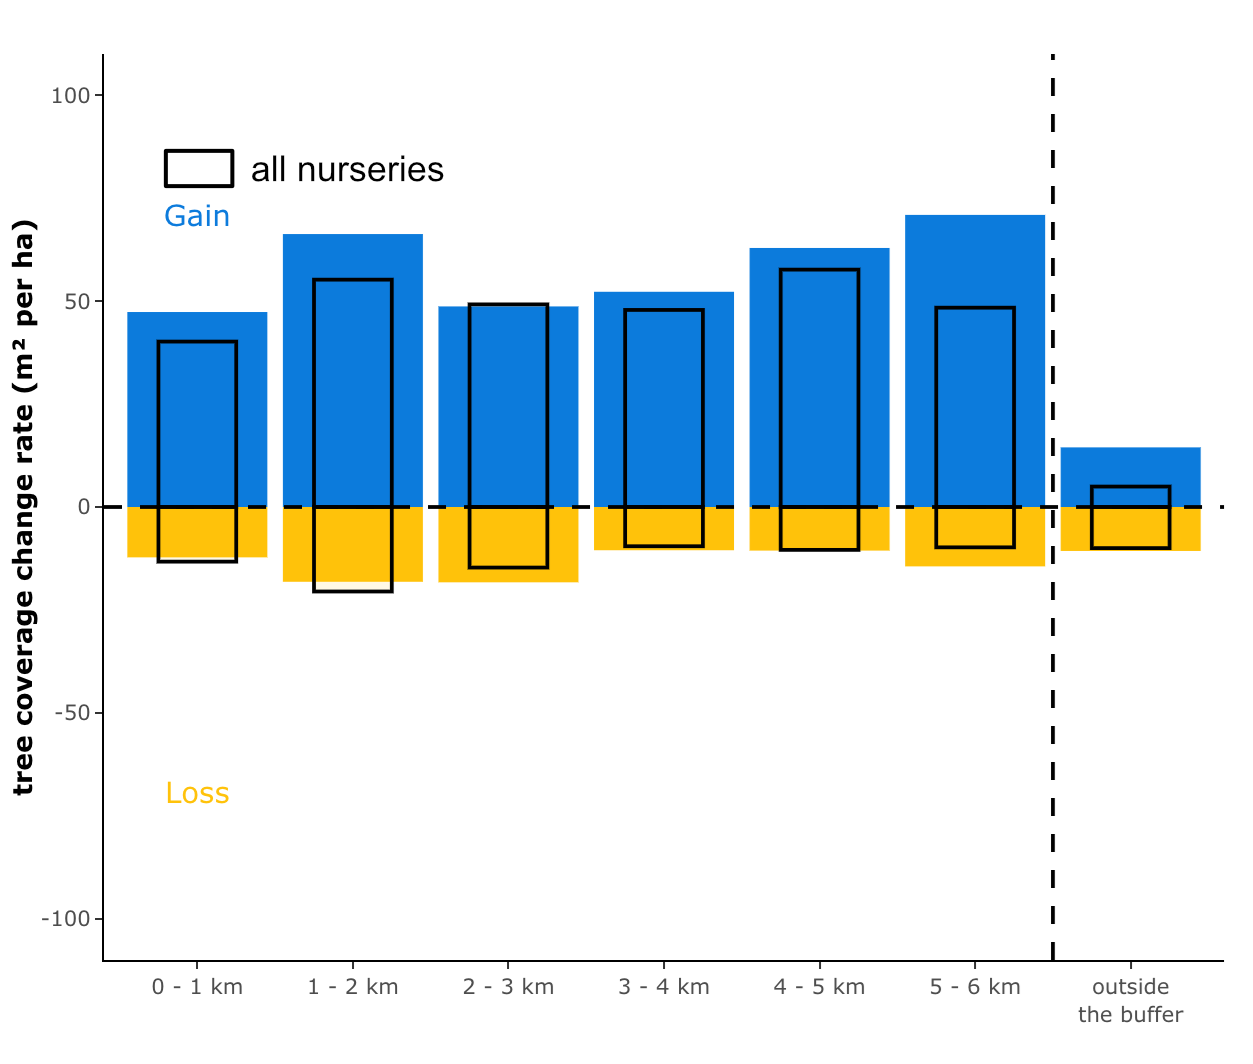 A bar chart showing greater tree gain rates around “super” nursery locations than the average of all nursery locations.